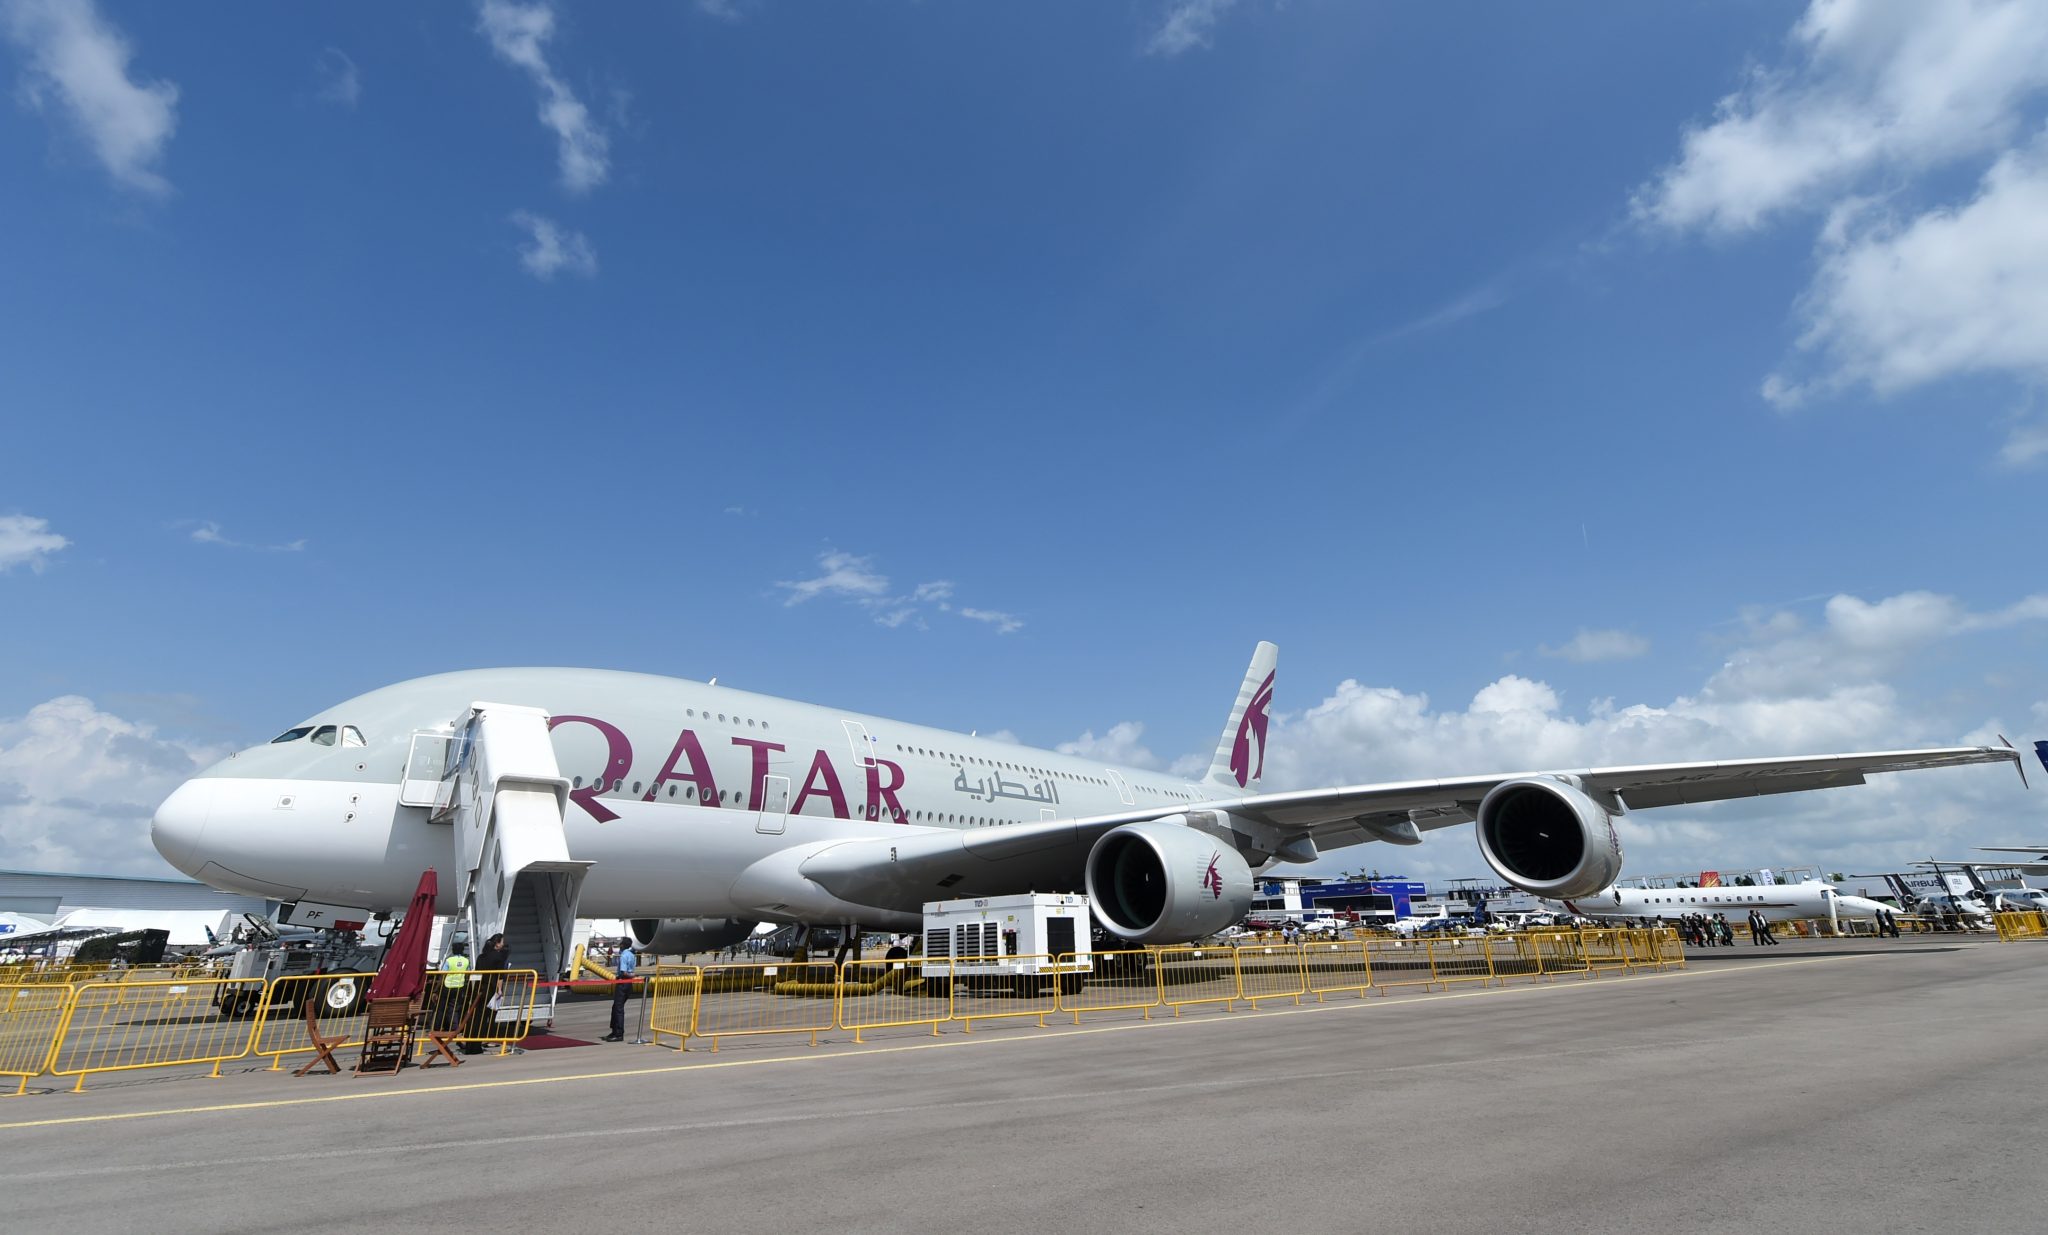 FILE PHOTO: A Qatar Airways Airbus A380 plane is seen at the static display during the Singapore Airshow at the Changi exhibition centre in Singapore on February 16, 2016. AFP PHOTO / ROSLAN RAHMAN / AFP PHOTO / ROSLAN RAHMAN